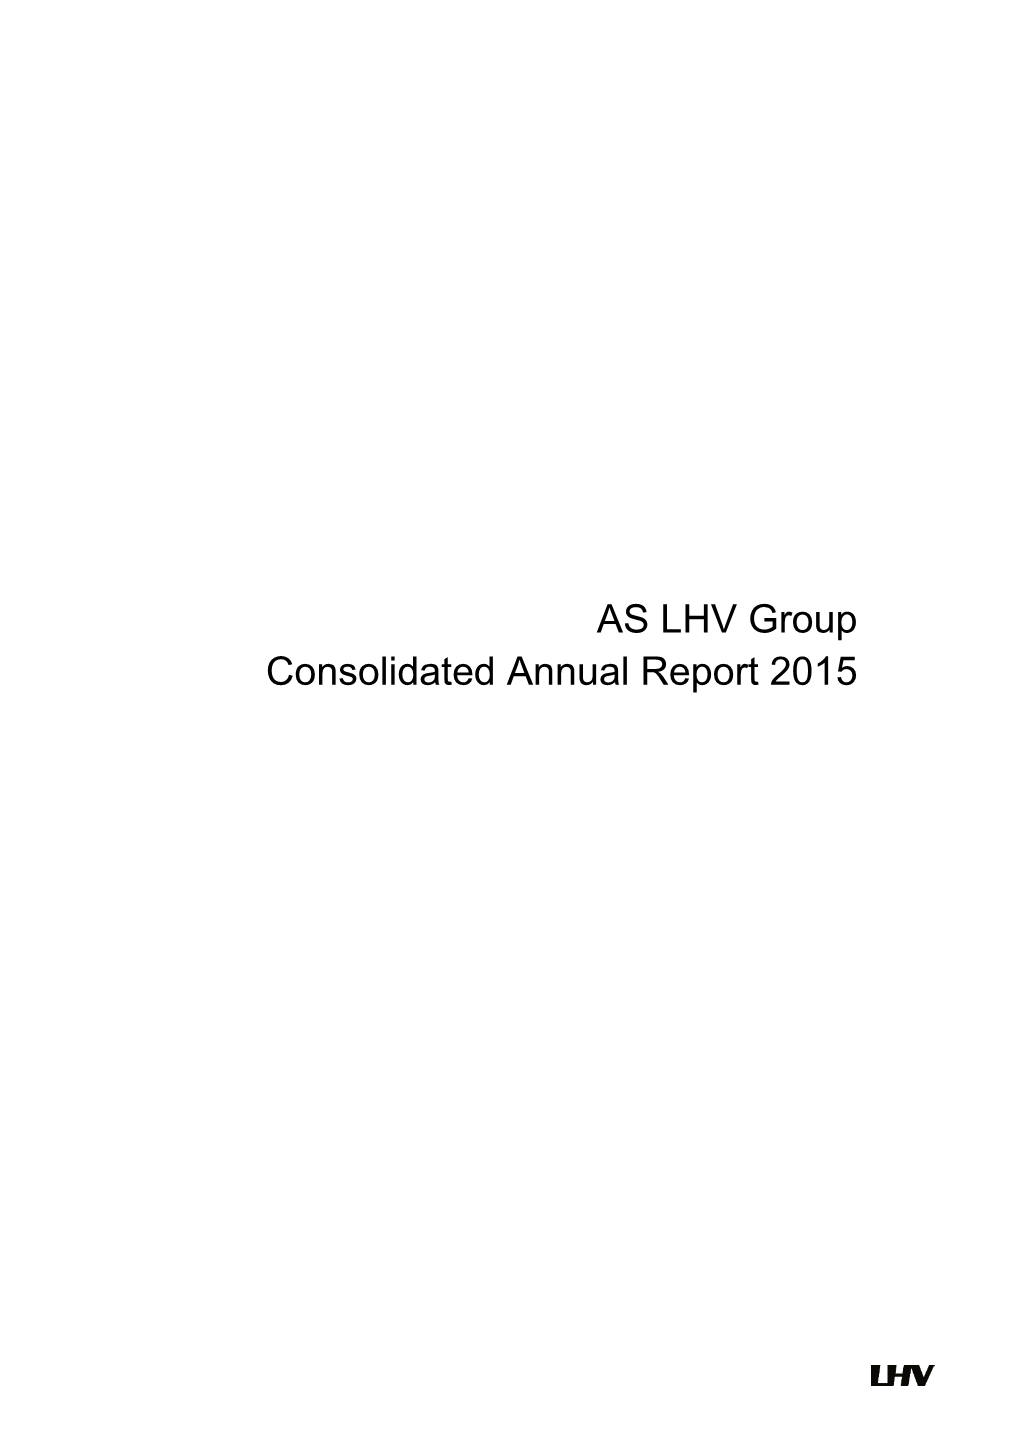 AS LHV Group Consolidated Annual Report 2015